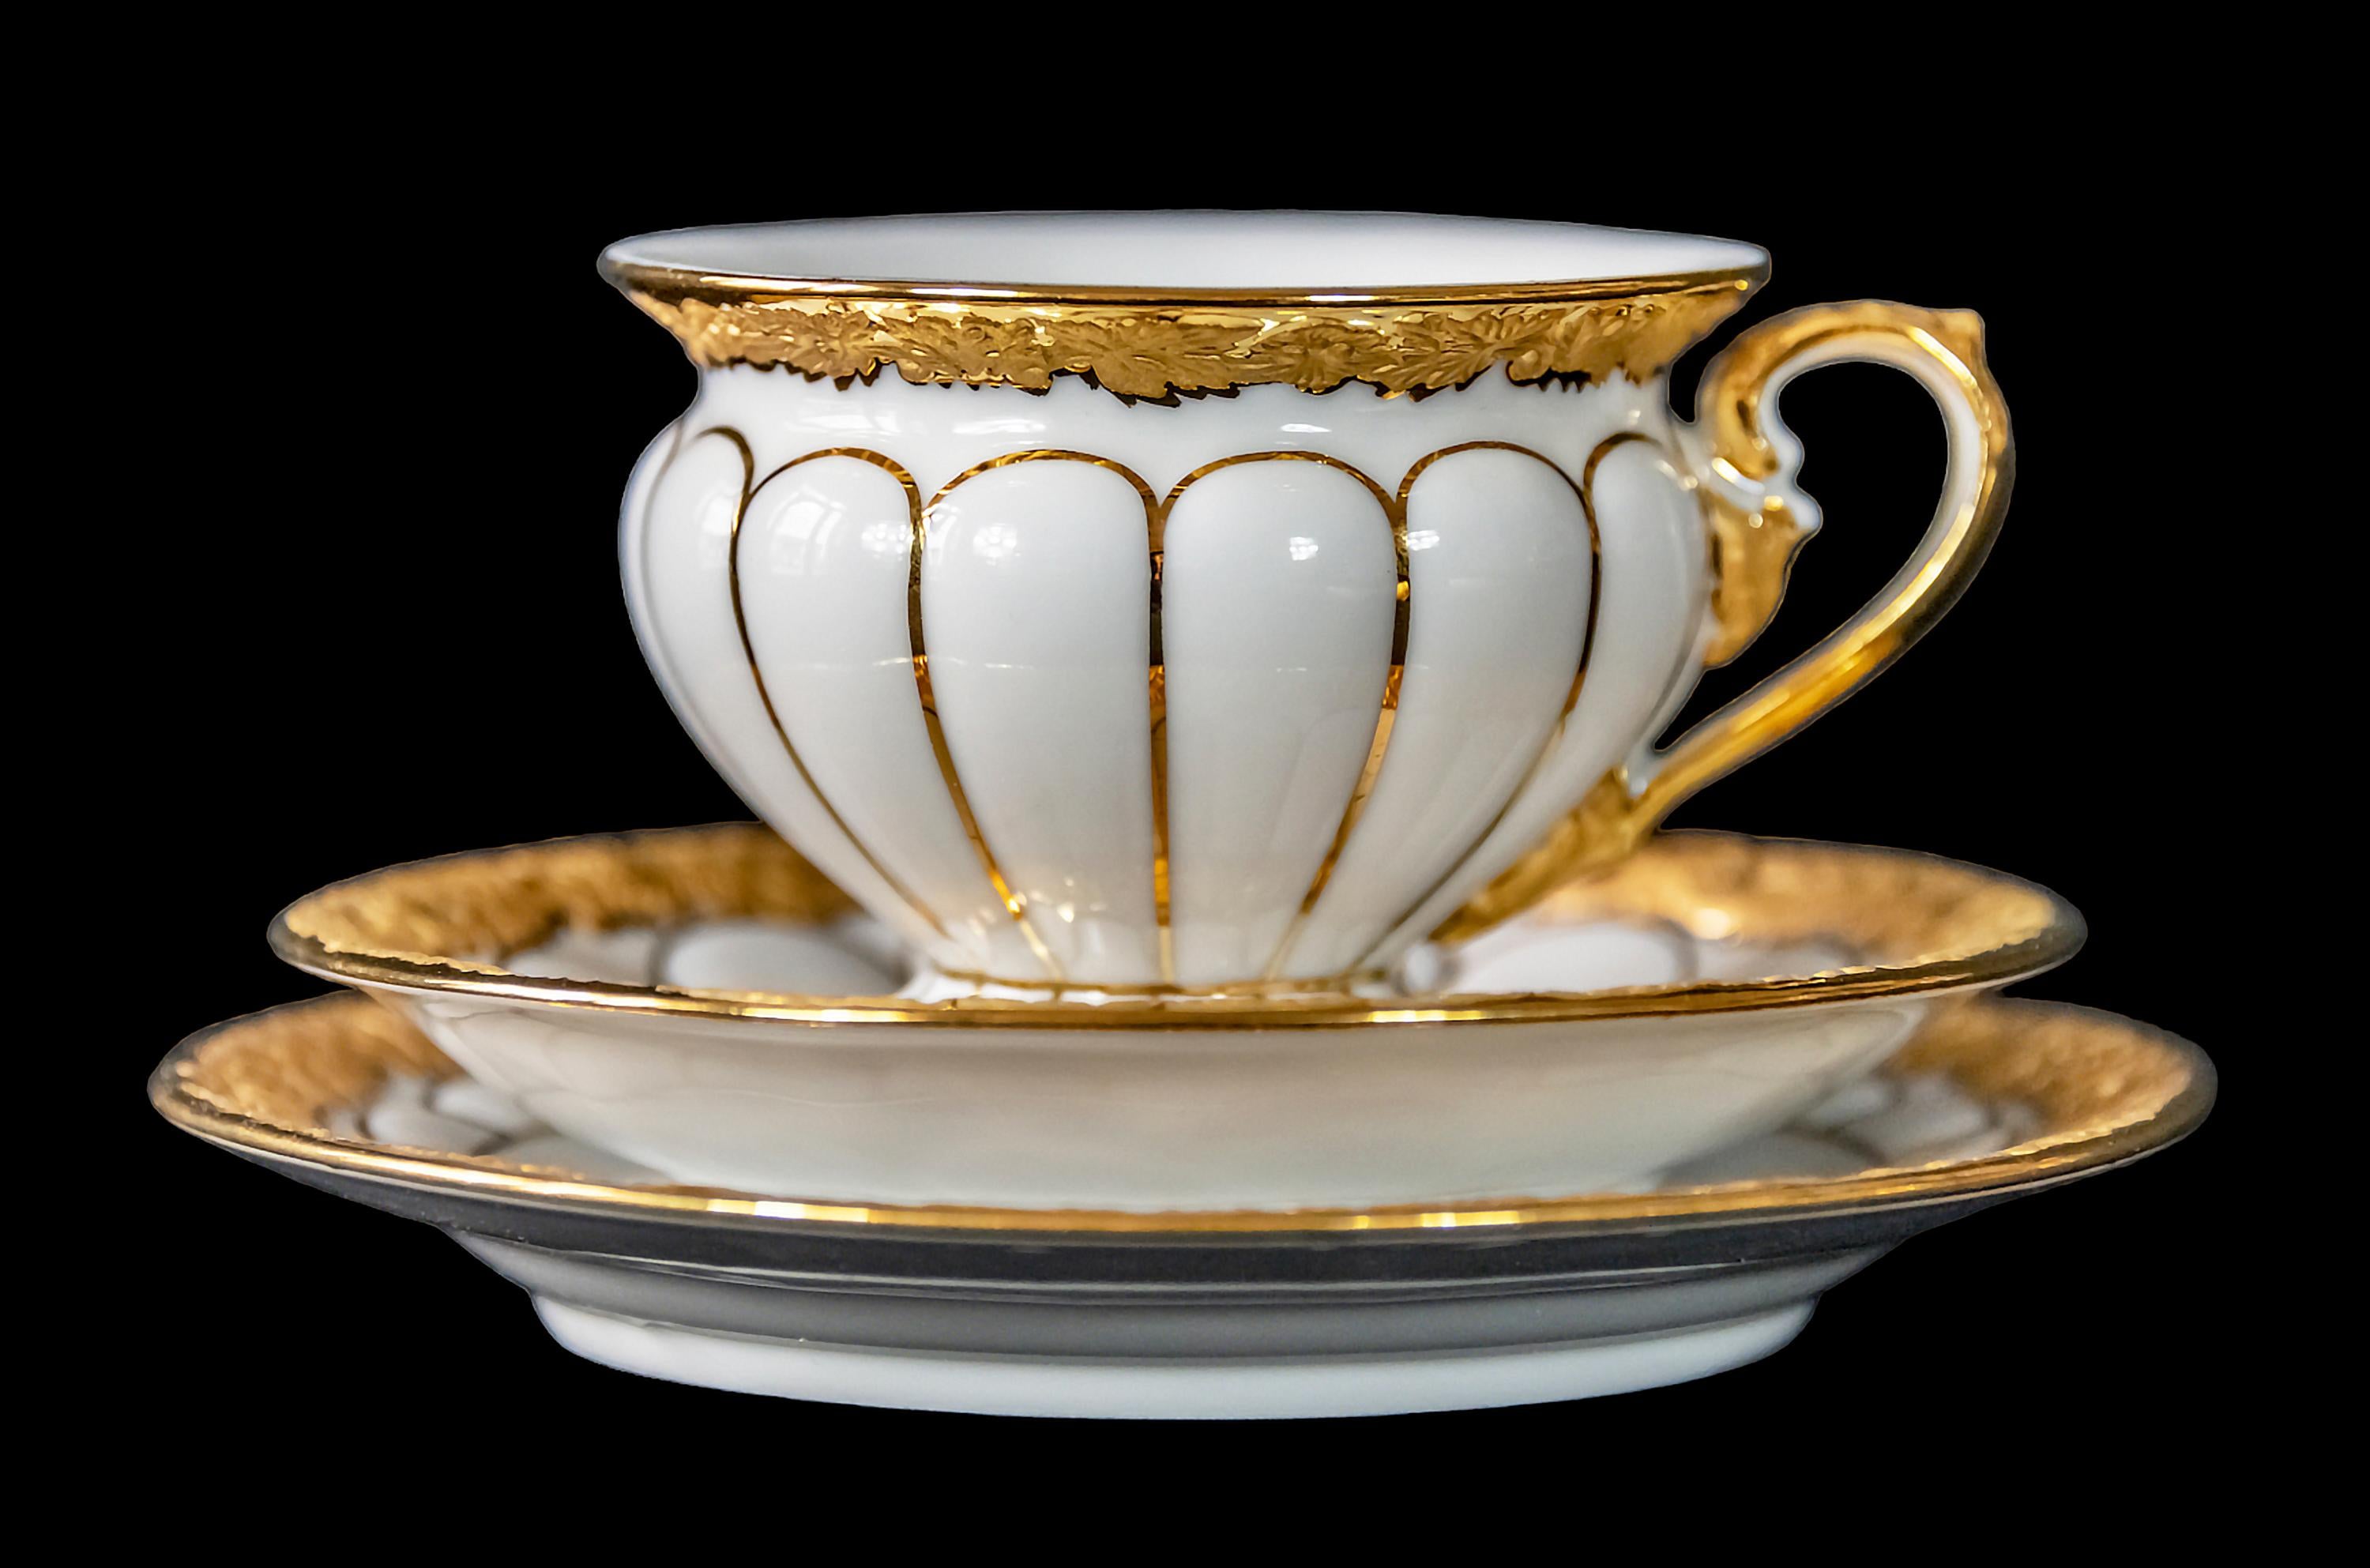 Meissen porcelain coffee cup with saucer and dessert plate all richly decorated with gold.
Measures:
Cup: H 6 x 9 x 7.5 cm
Saucer: 12 cm
Dessert plate: 14 cm.